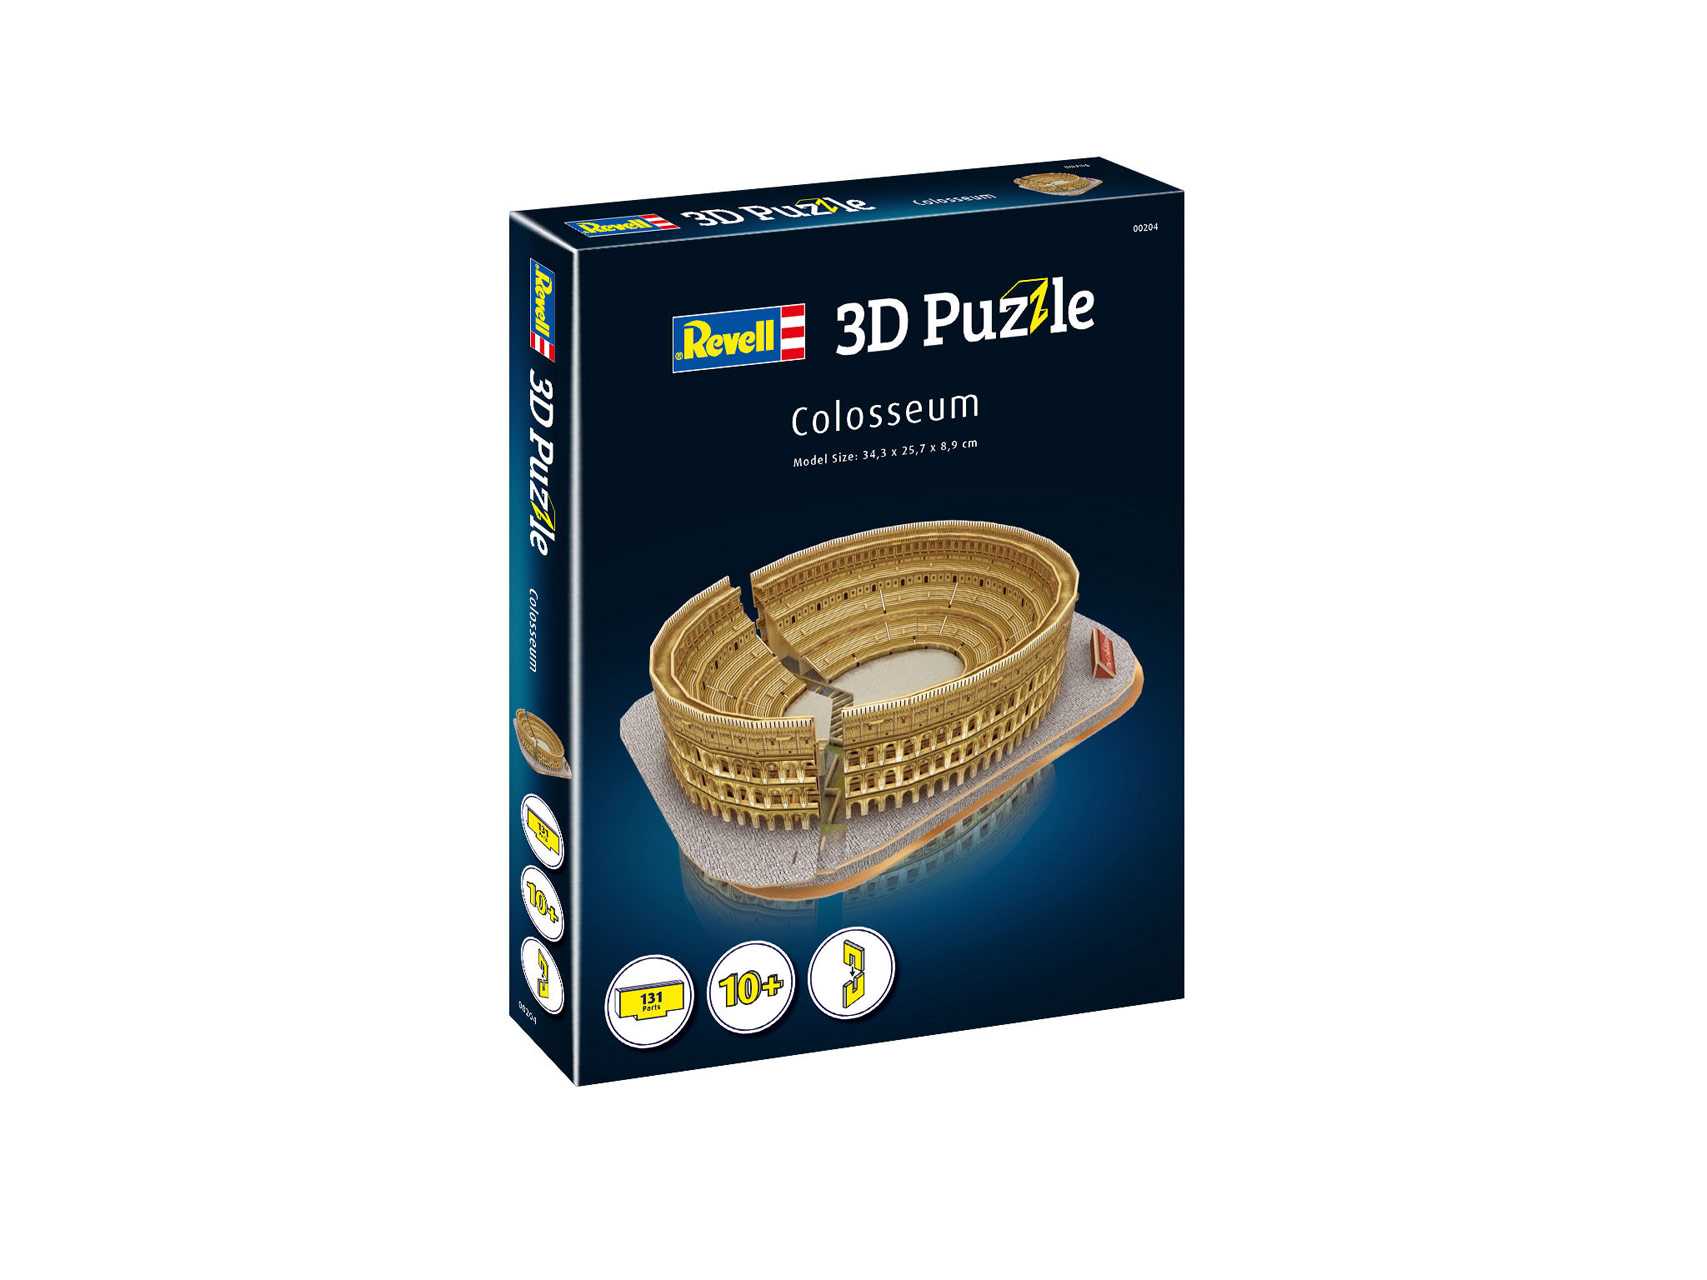 3D Puzzle REVELL 00204 - The Colosseum